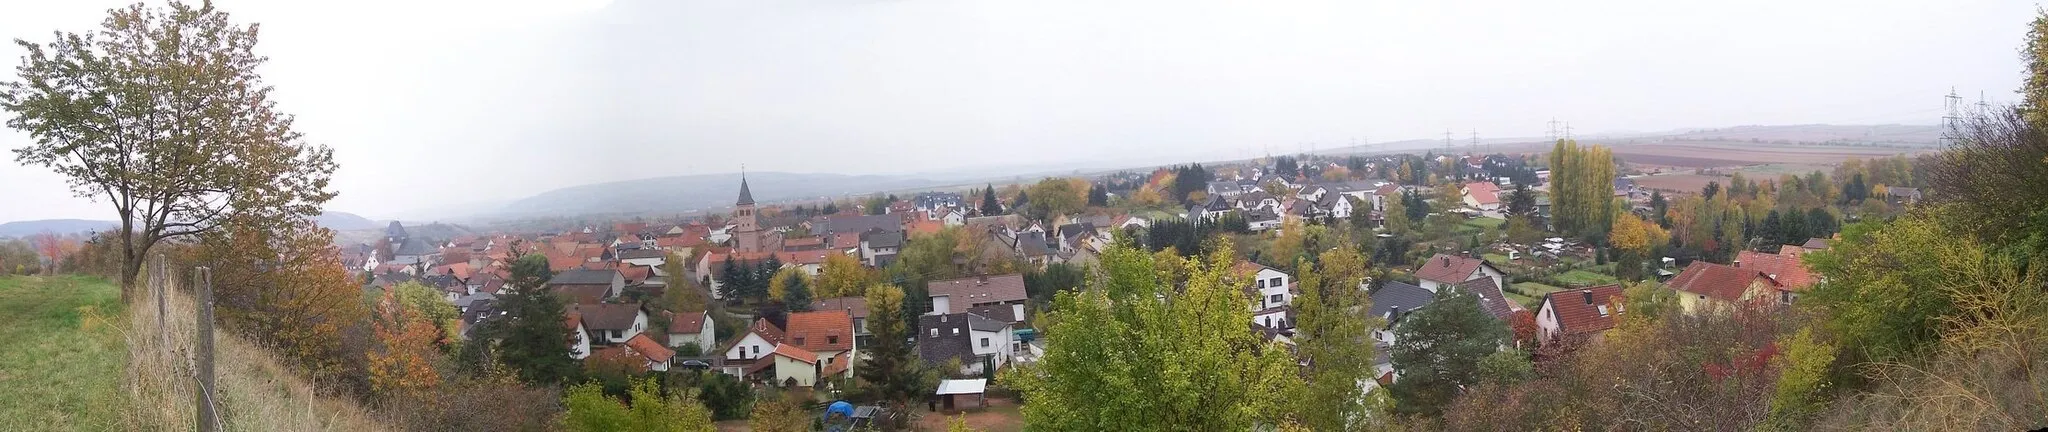 Photo showing: Roxheim in the district of Bad Kreuznach, in Rhineland-Palatinate, Germany.